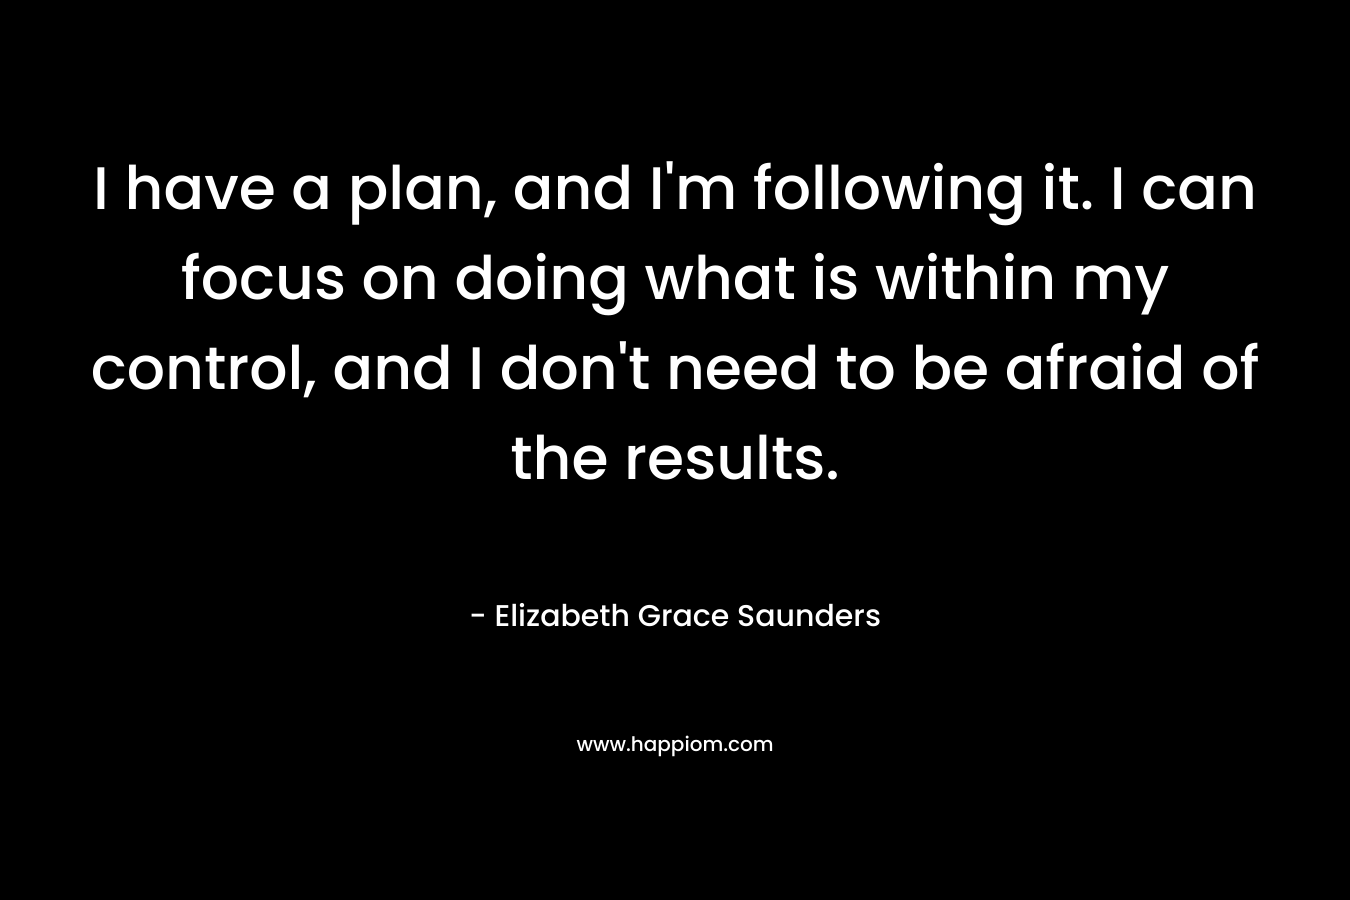 I have a plan, and I'm following it. I can focus on doing what is within my control, and I don't need to be afraid of the results.